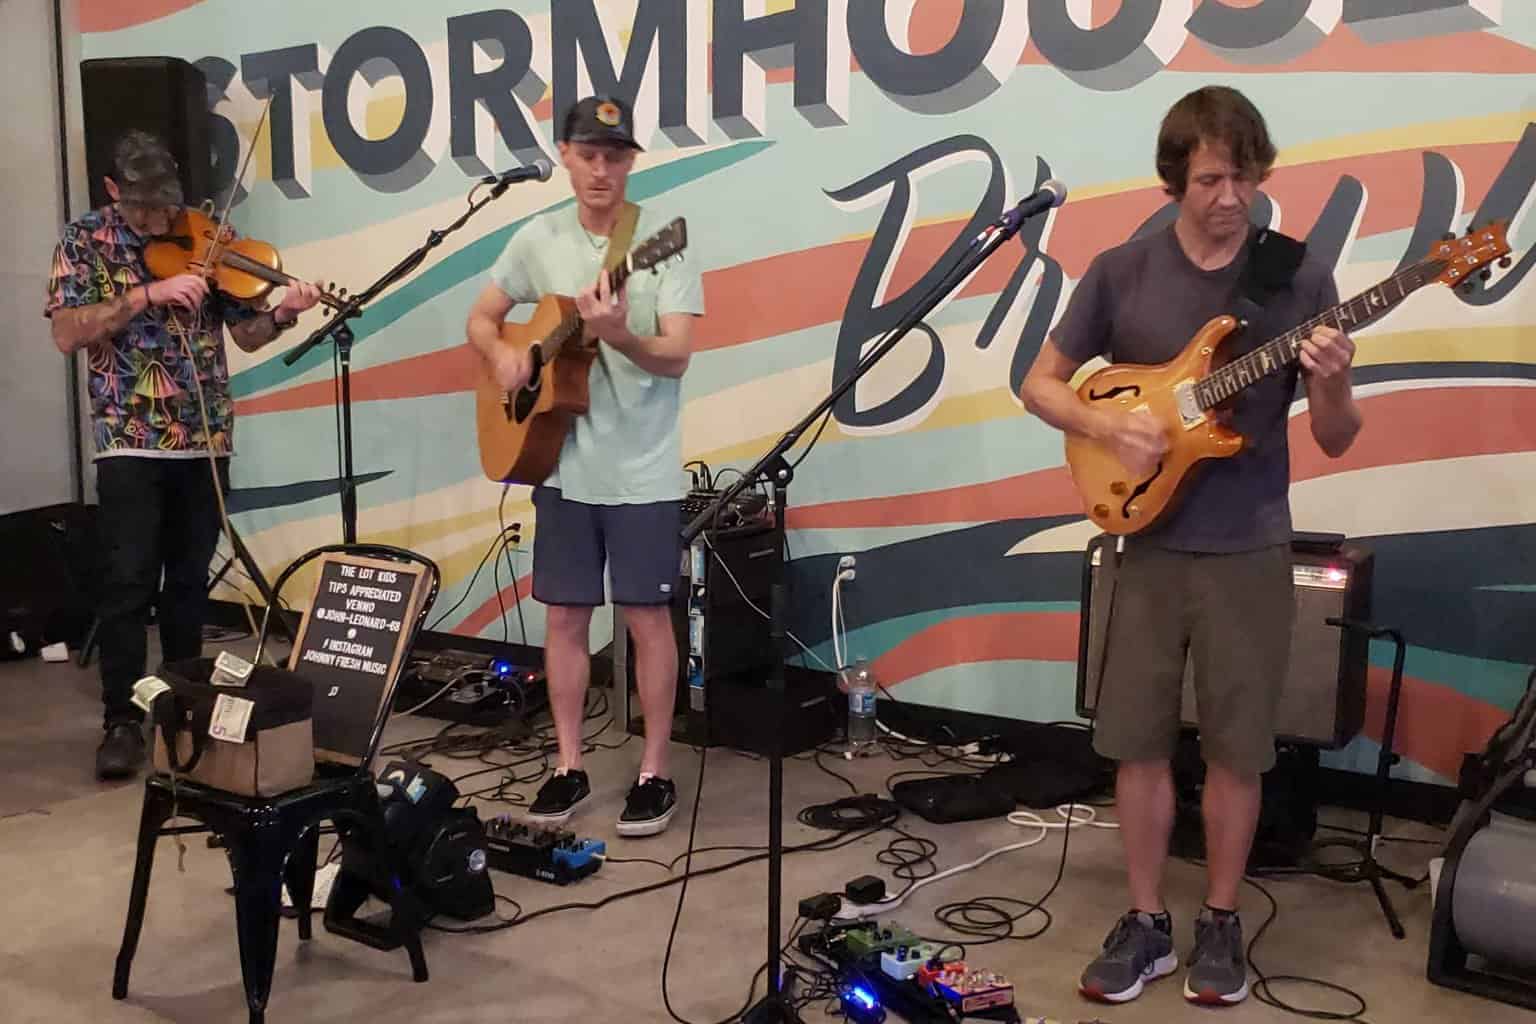 The Lot Kids at Stormhouse Brewing